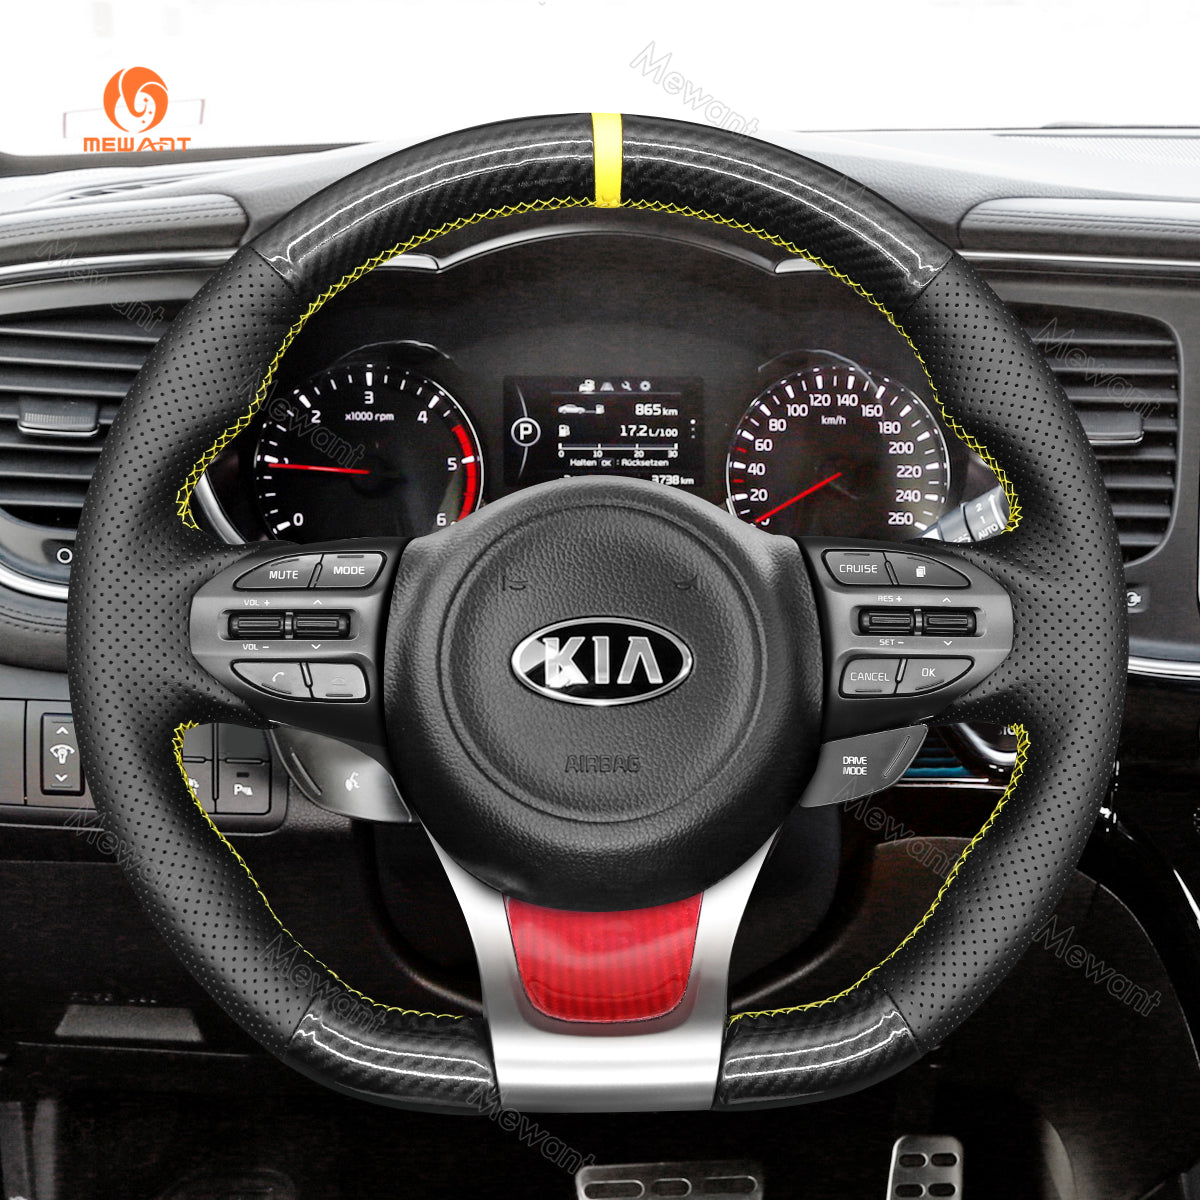 MEWANT Hand Stitch Car Steering Wheel  for Kia Ceed Cee'd 2 (GT) / Proceed Pro Ceed (GT) / Optima